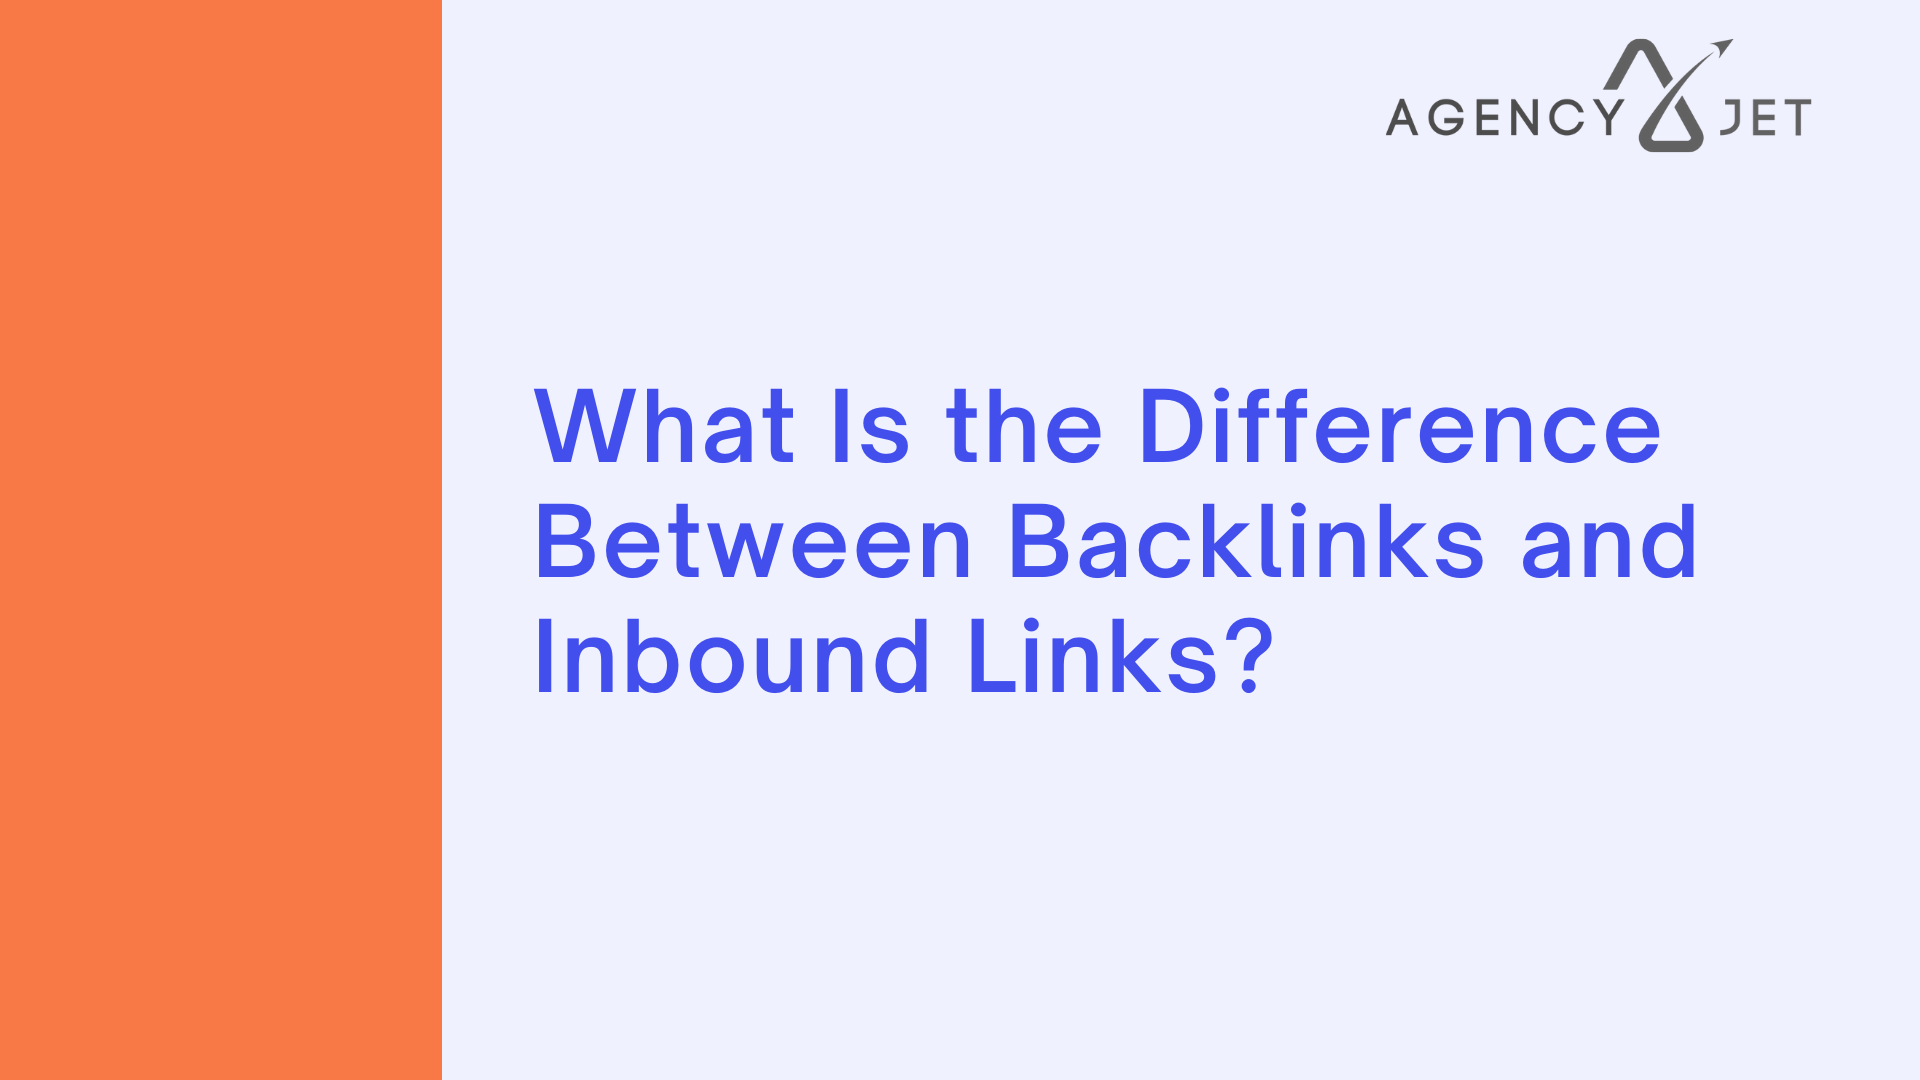 What Is the Difference Between Backlinks and Inbound Links - Agency Jet (1)